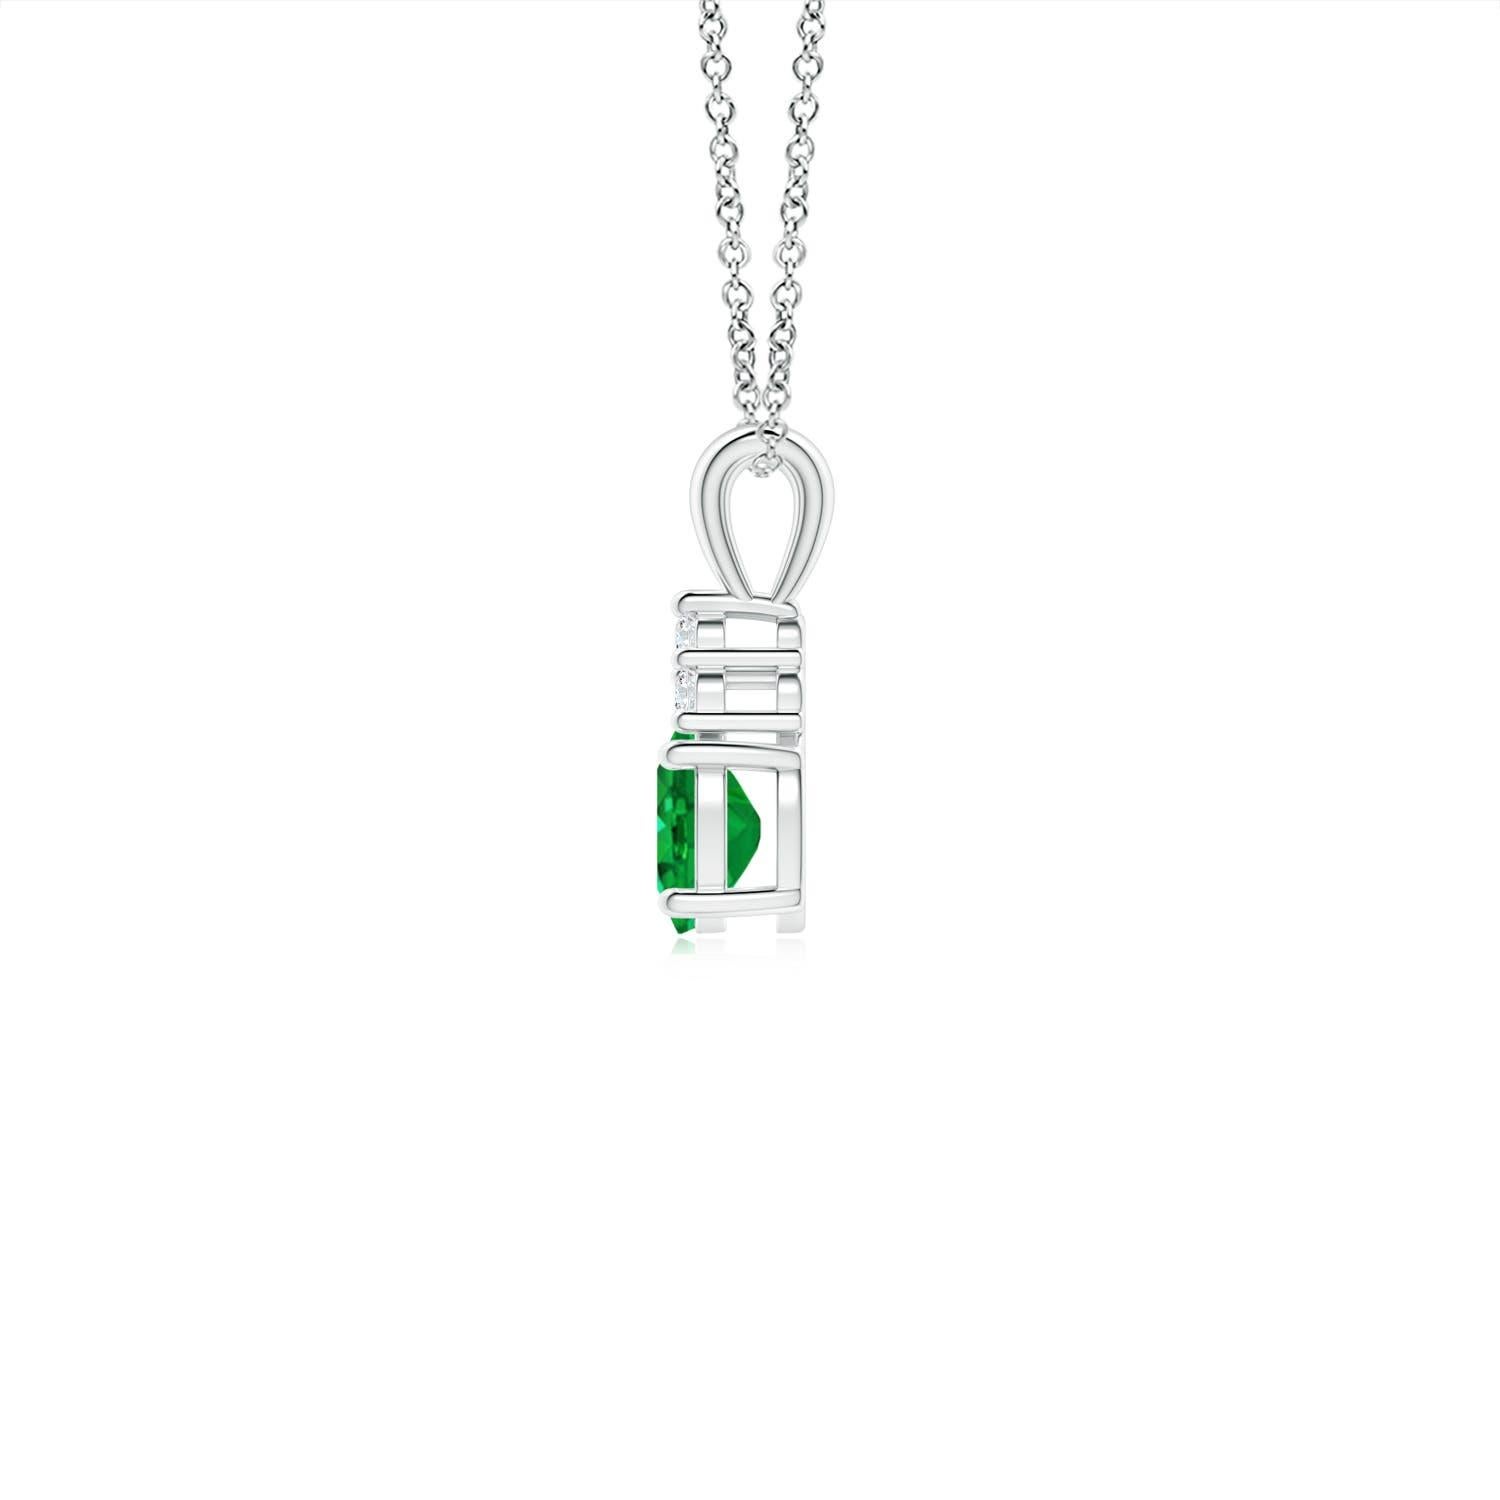 Set in 14k white gold, this classic solitaire emerald pendant showcases the perfect blend of style and elegance. It features a lush green emerald adorned with three sparkling round diamonds on the top. Linked to a lustrous v-bale, this four-prong